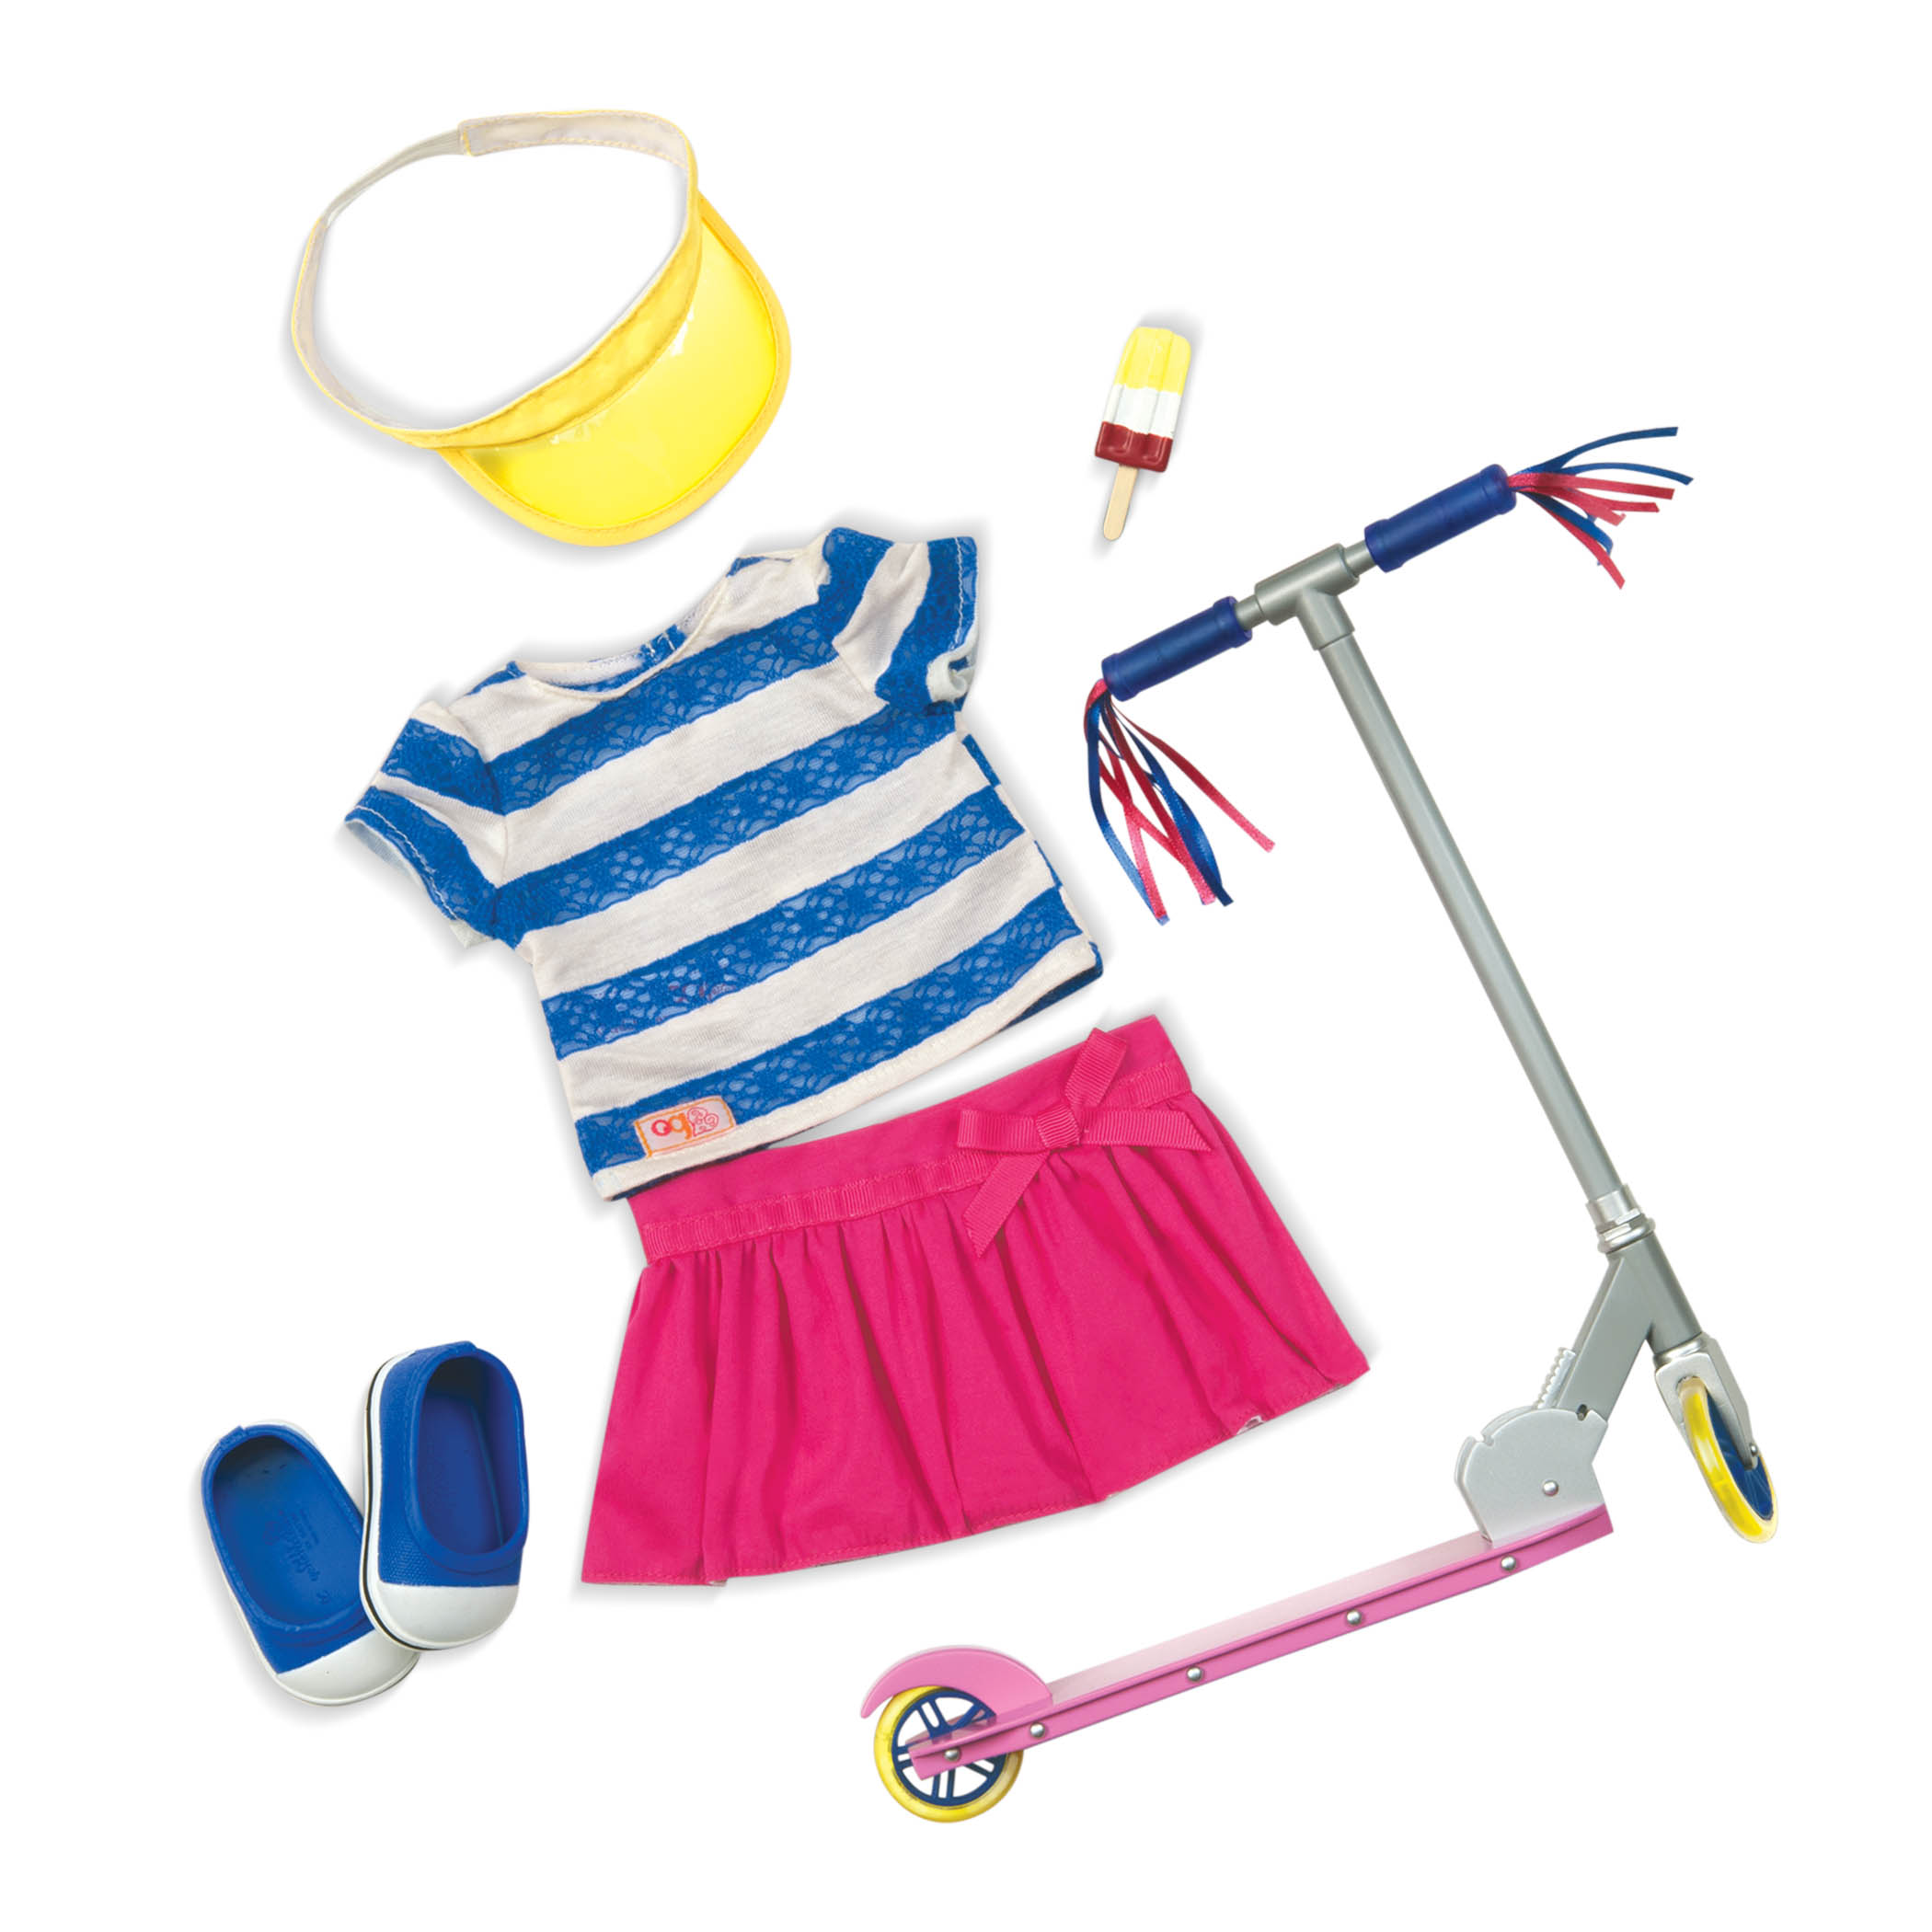 Deluxe outfit with scooter and accessories